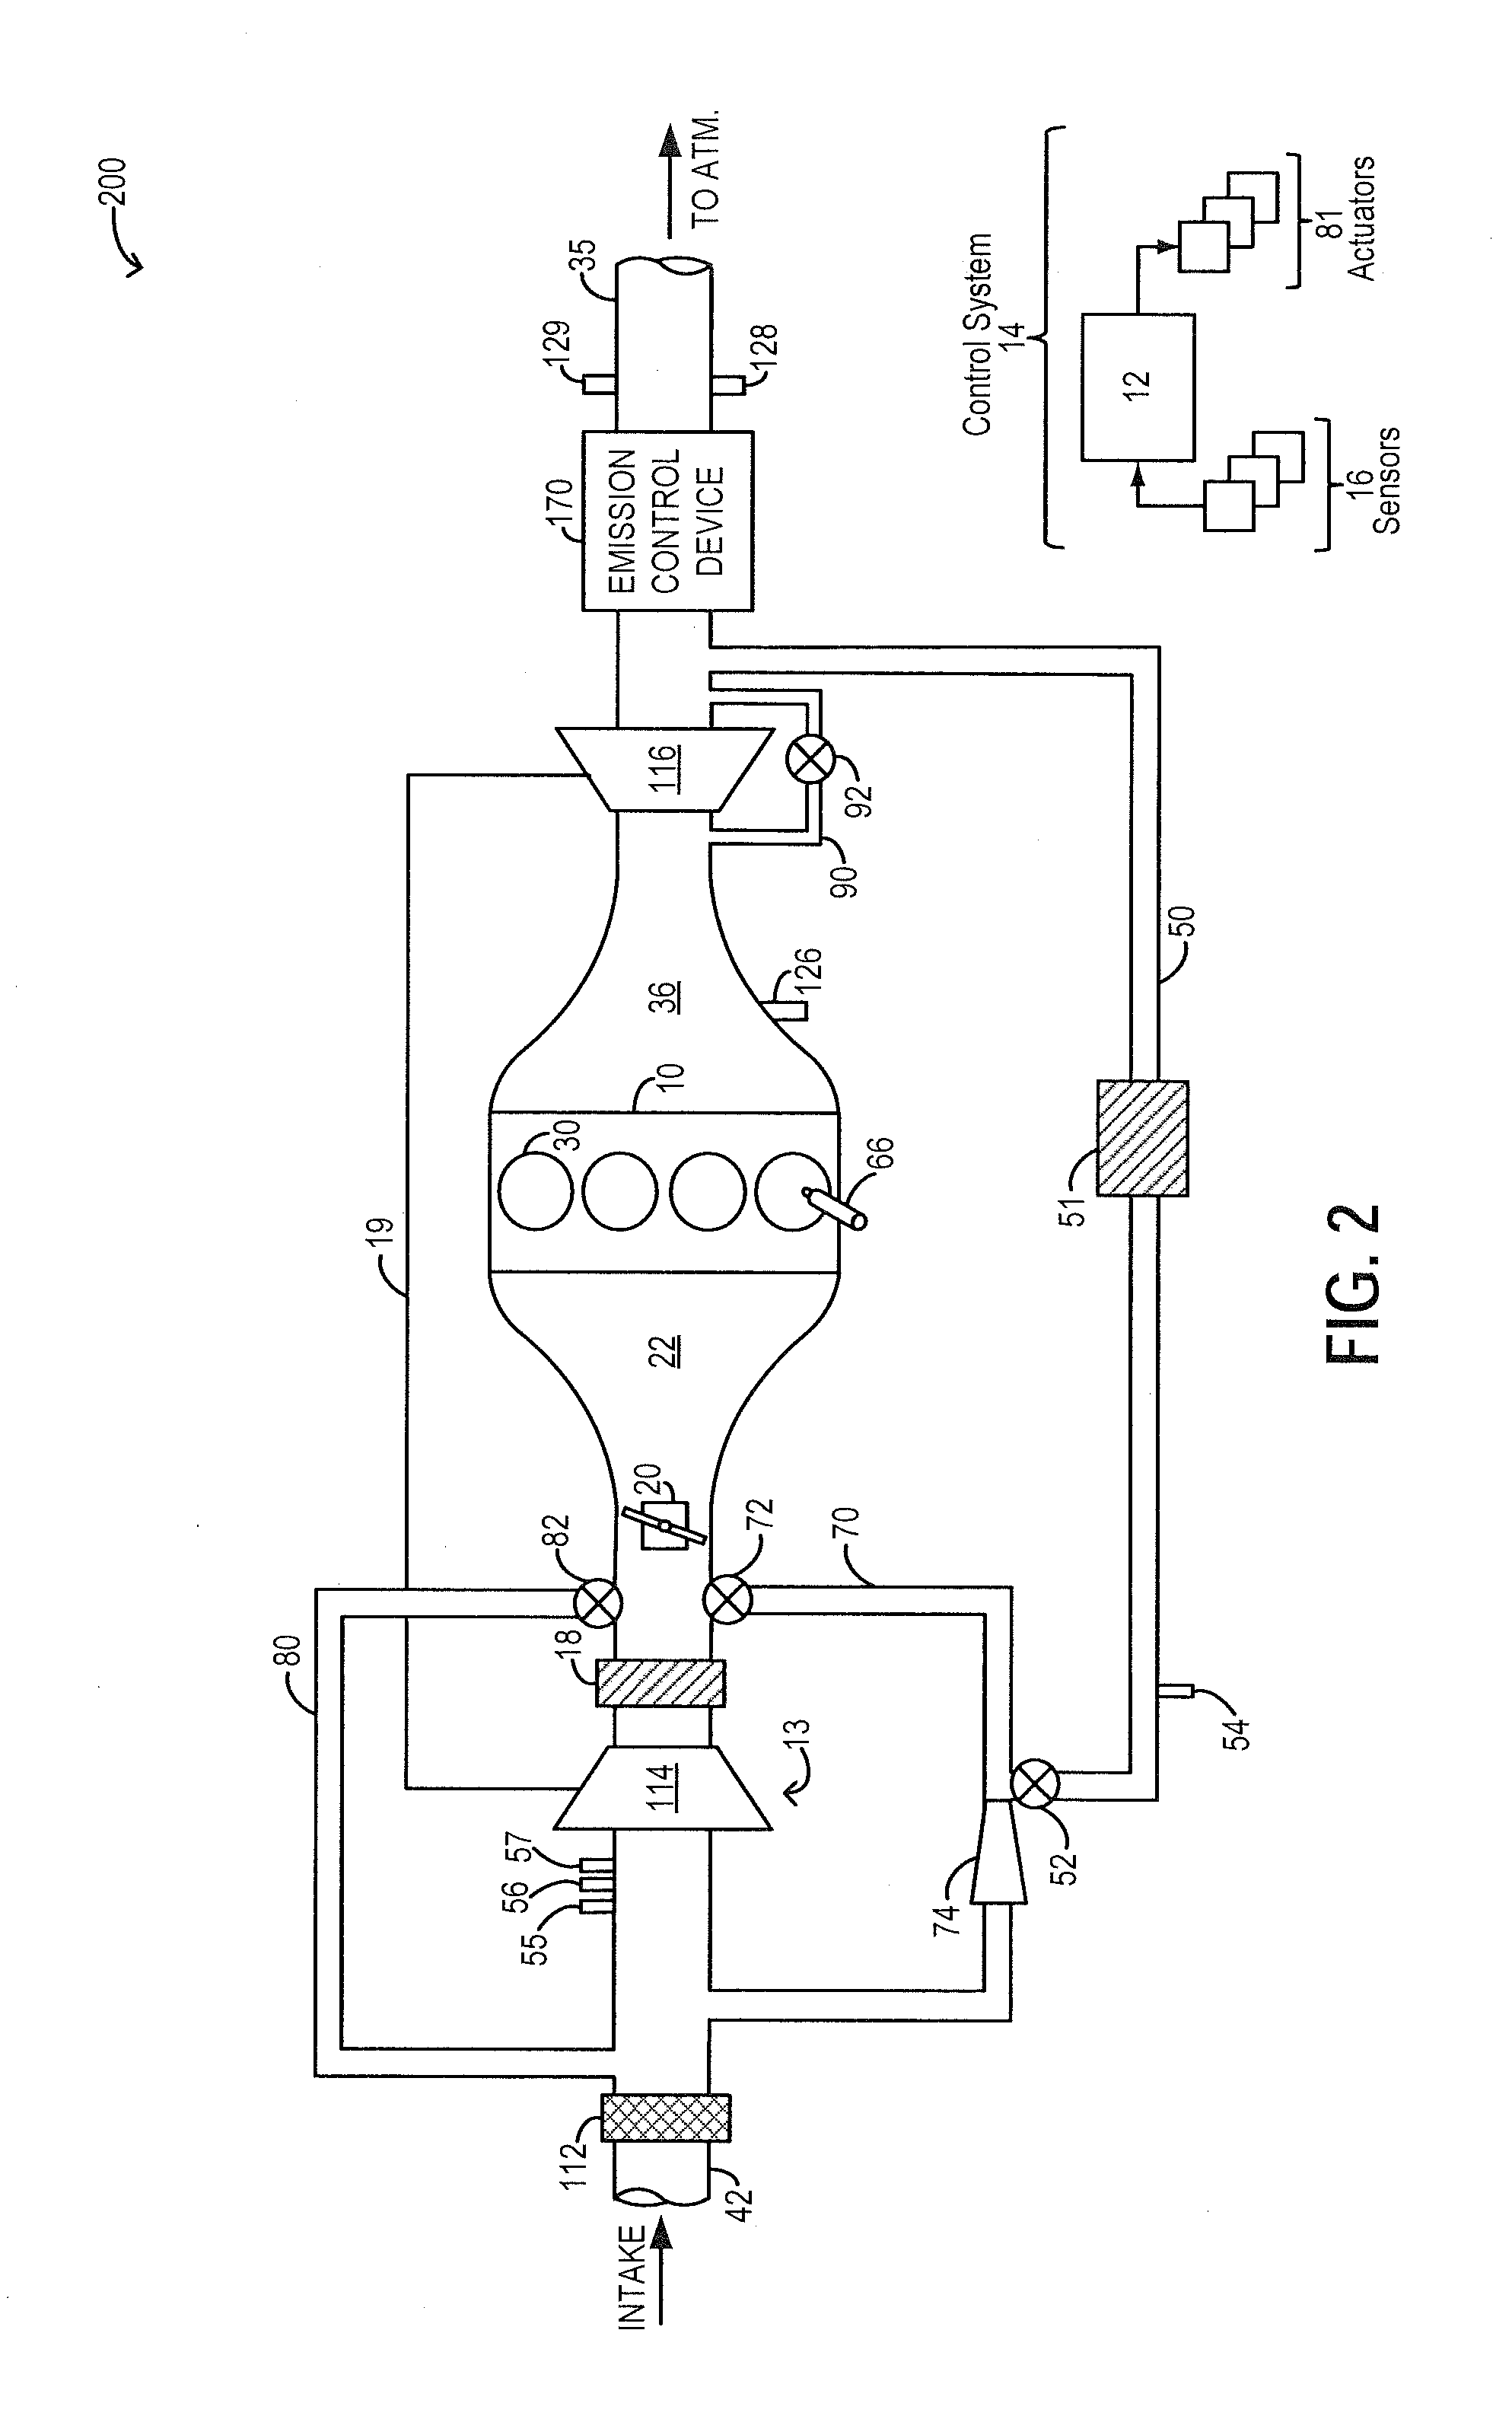 Methods and systems for EGR control